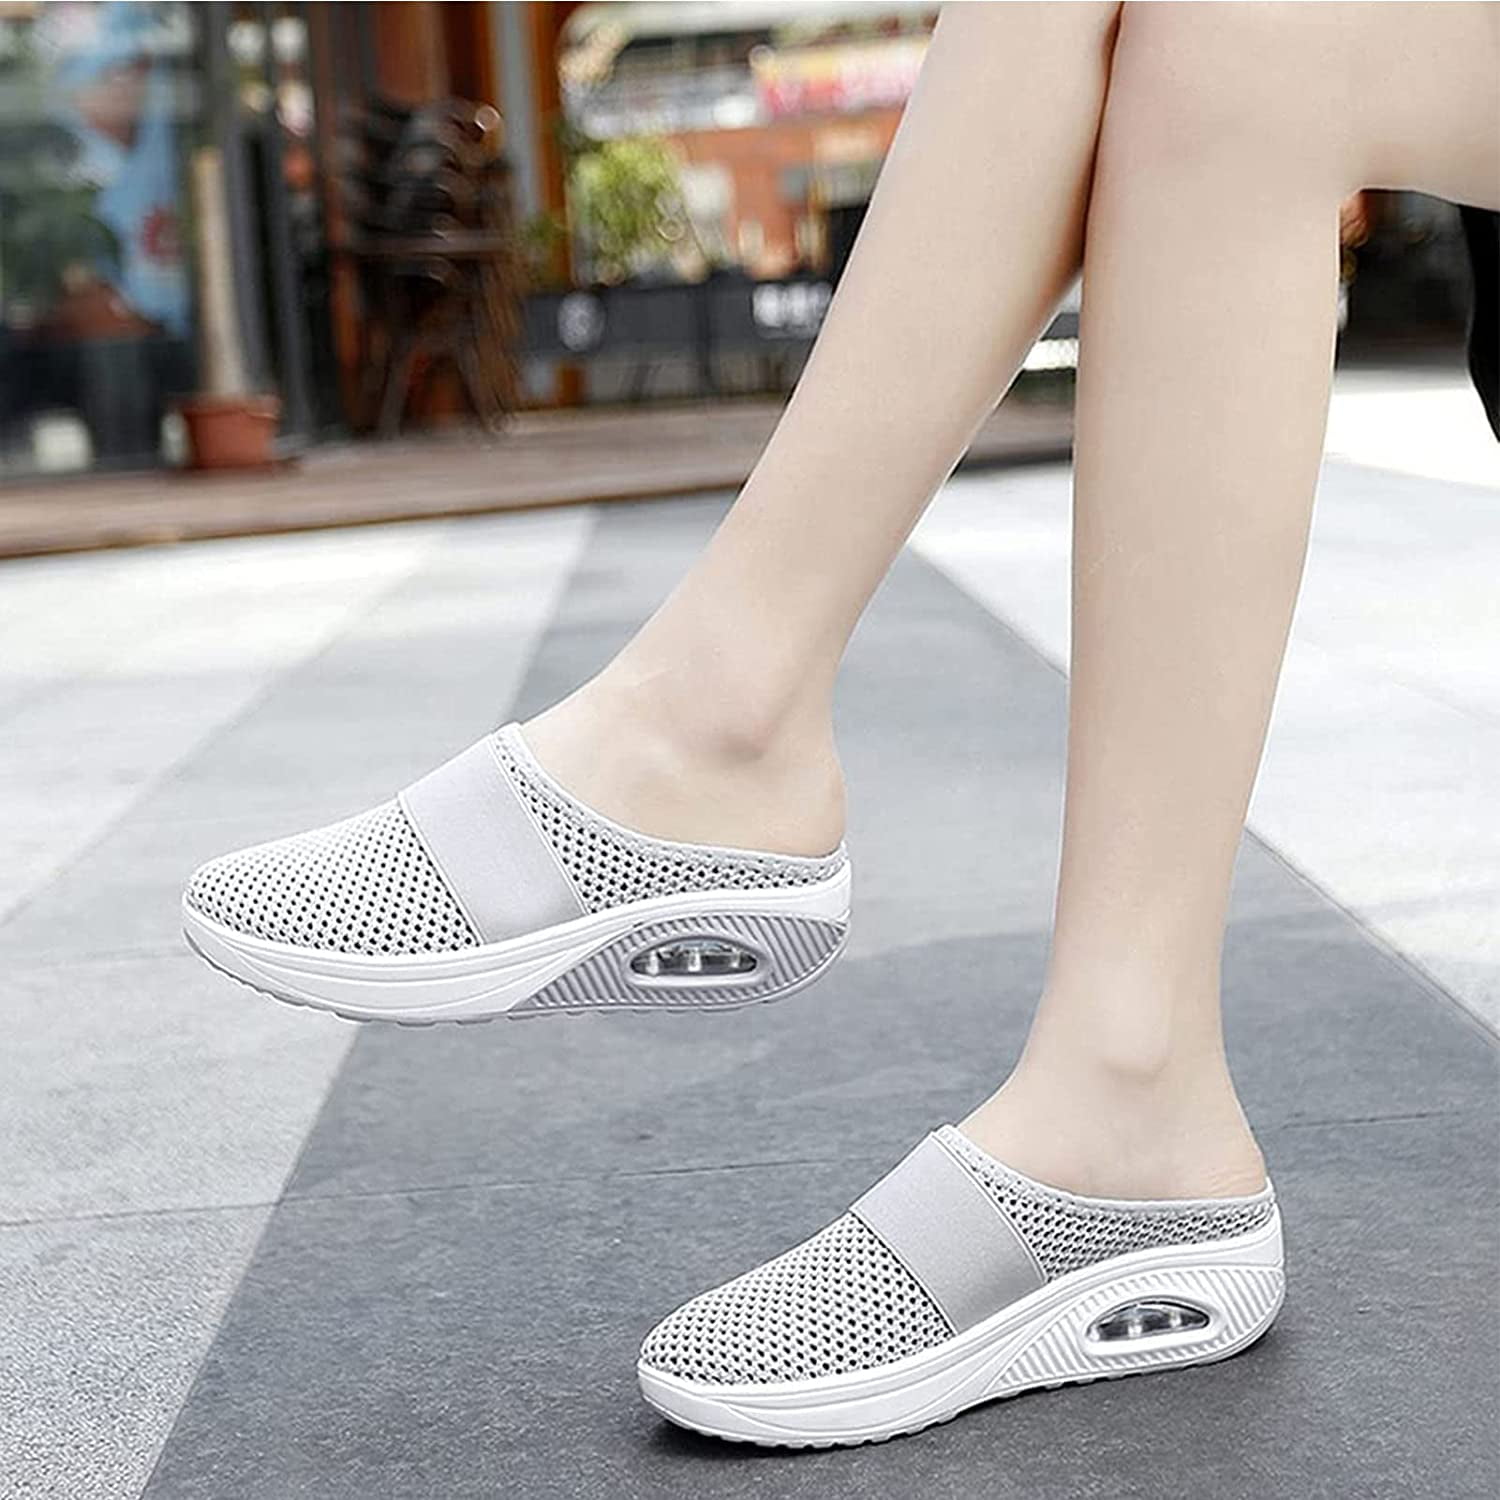 A,35 SGHD Air Cushion Slip-On Orthopedic Diabetic Walking Shoes,Mens and Womens Half Slippers,Breathable with Arch Support Outdoor Knit Casual Shoes 